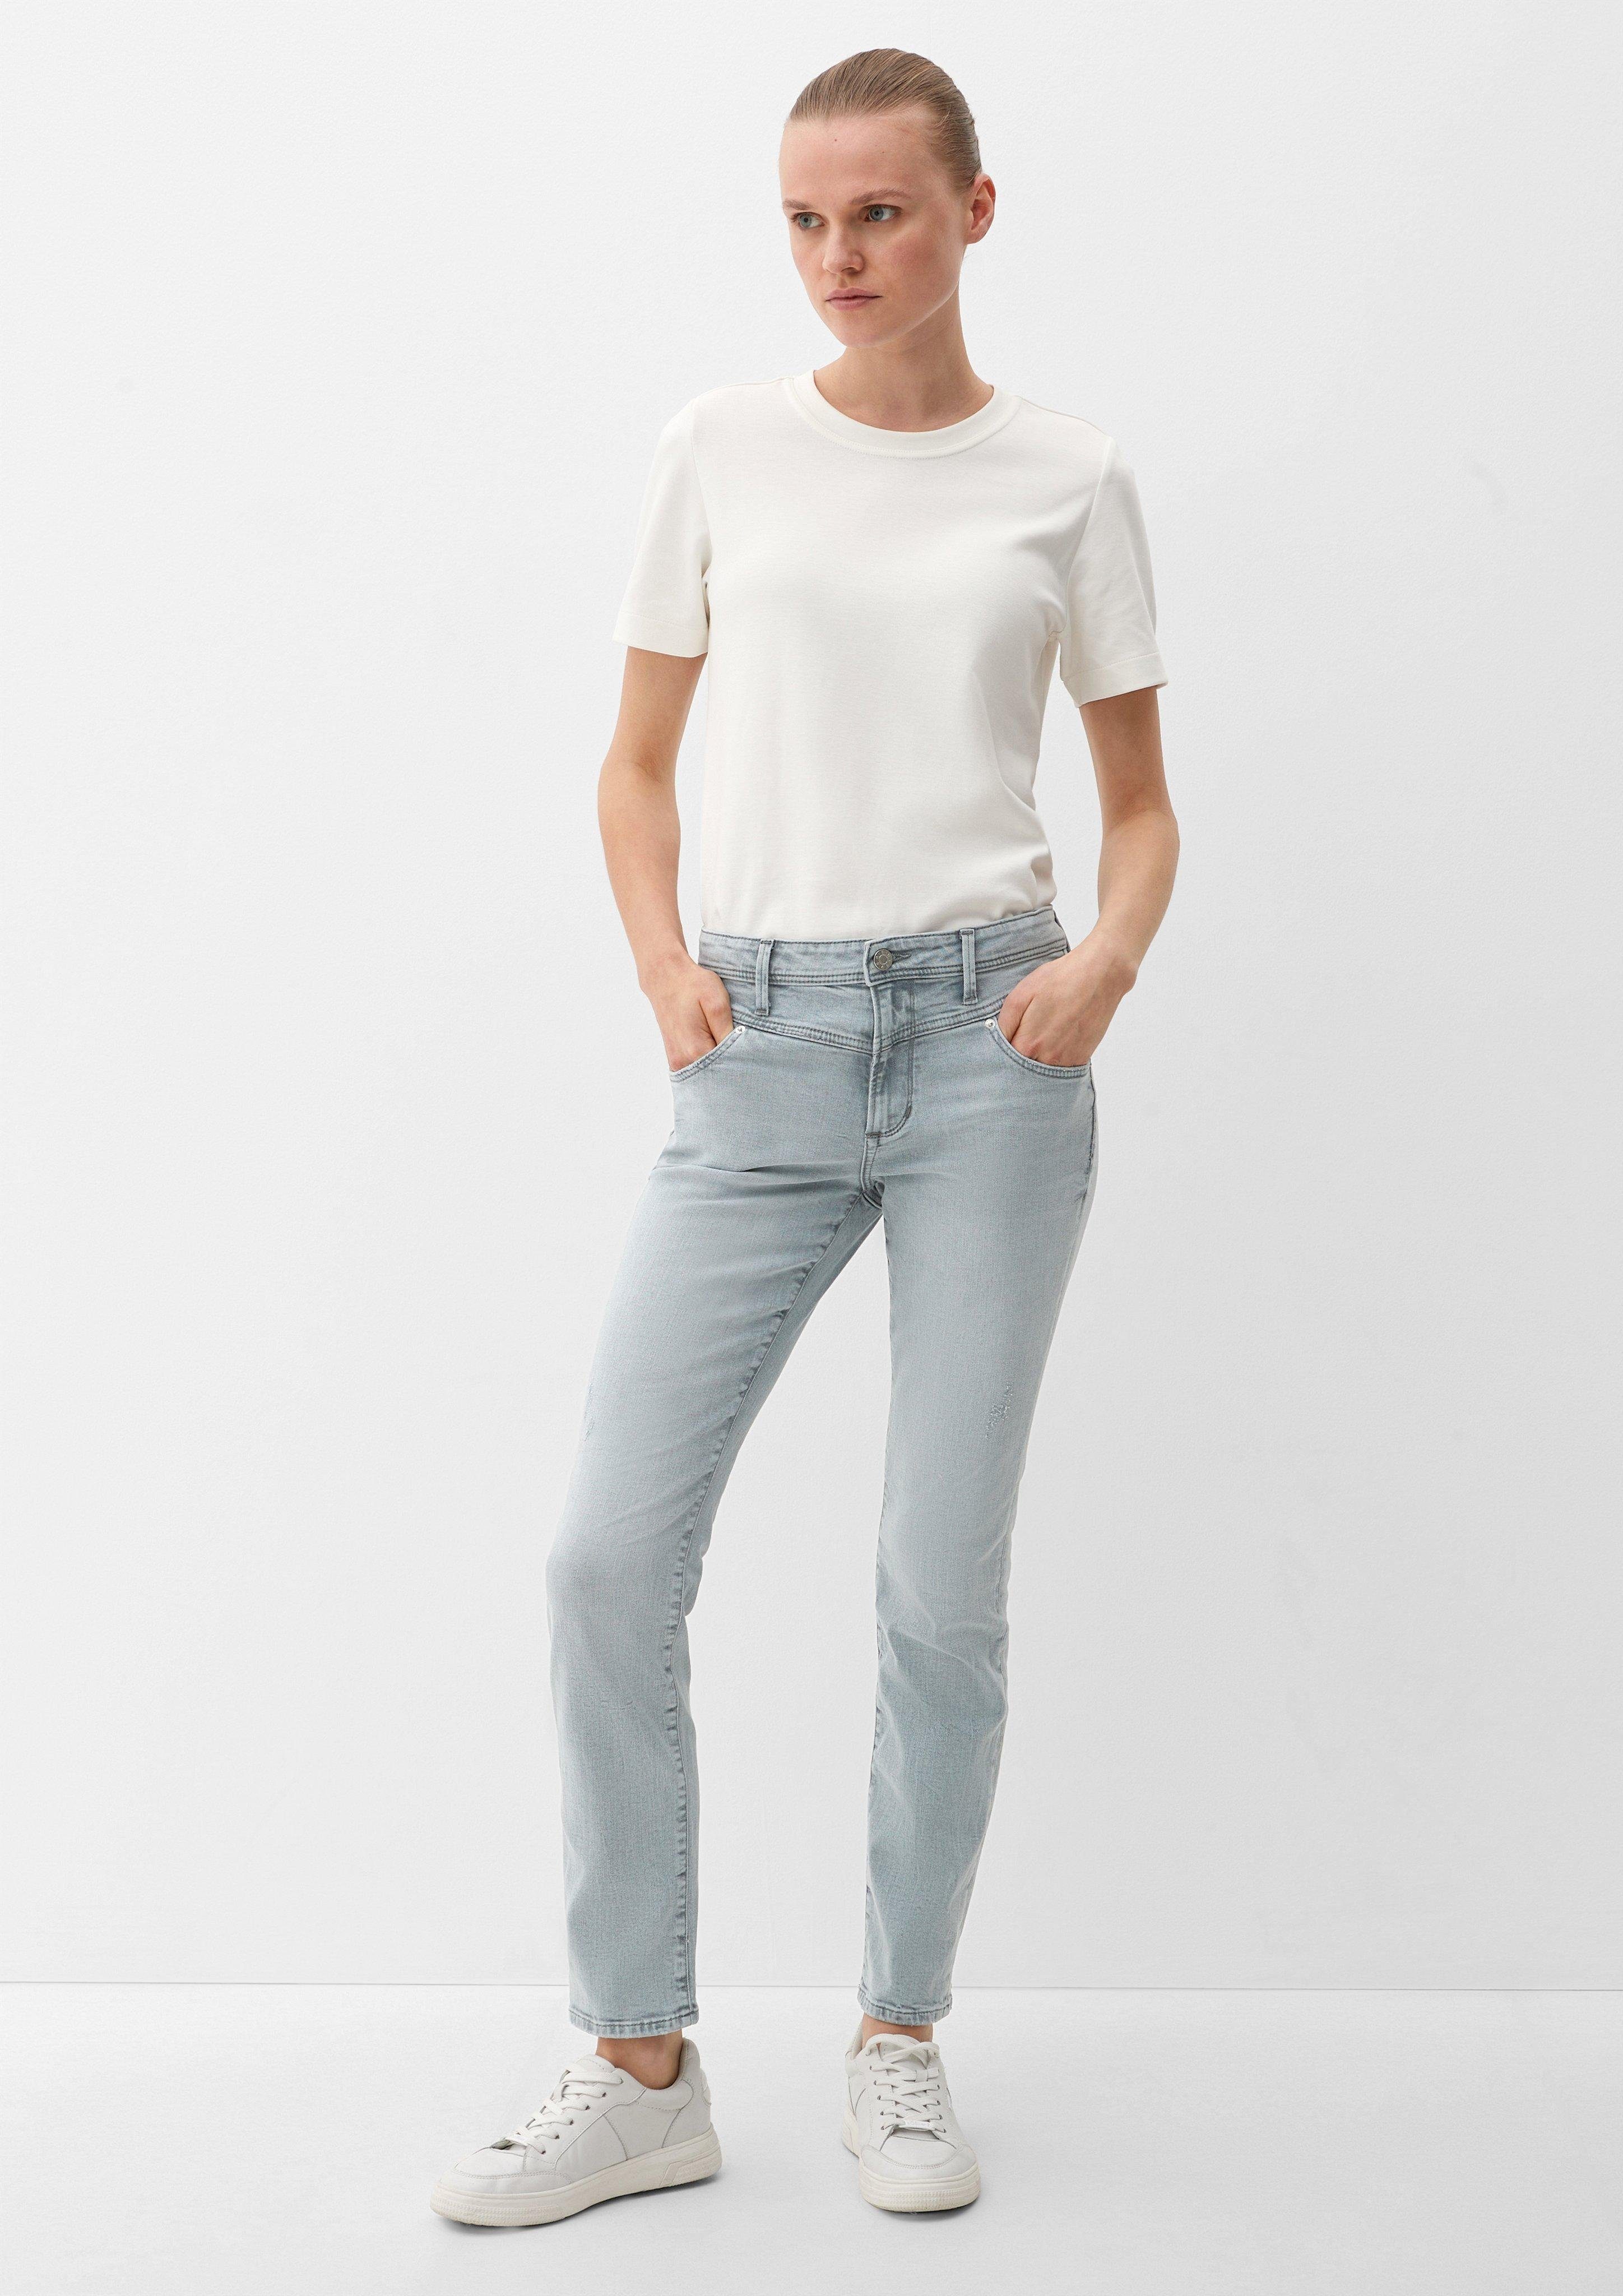 Waschung 5-Pocket-Jeans / Slim s.Oliver Leg Slim Mid Jeans Betsy / Rise Fit /